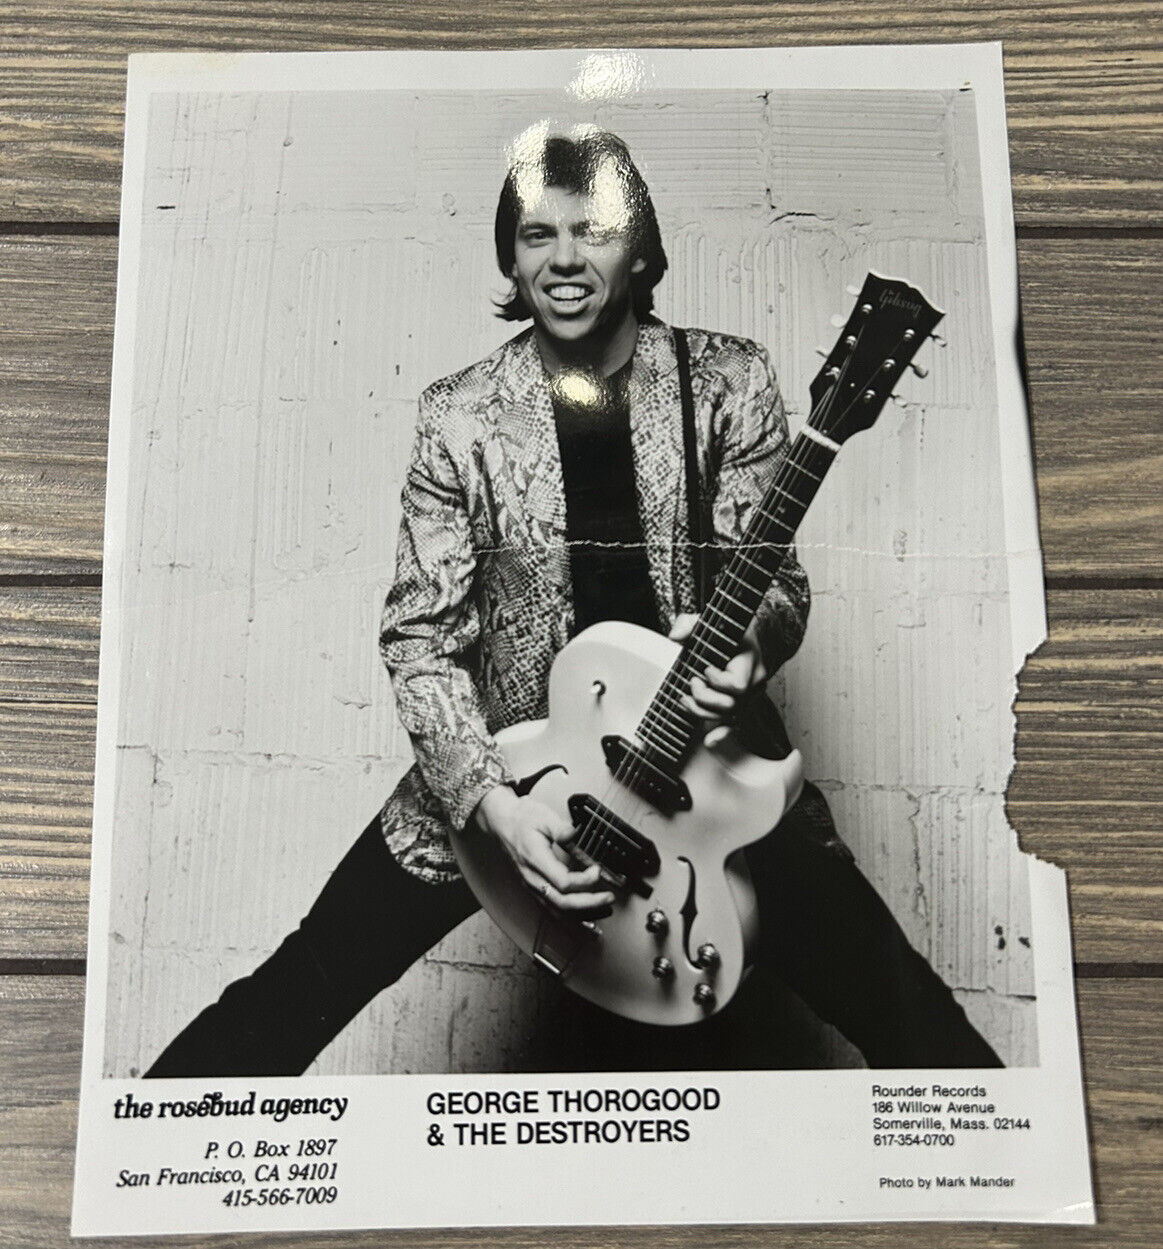 Vintage George Thorogood and the Destroyers Press Release Photo Mark Mander D